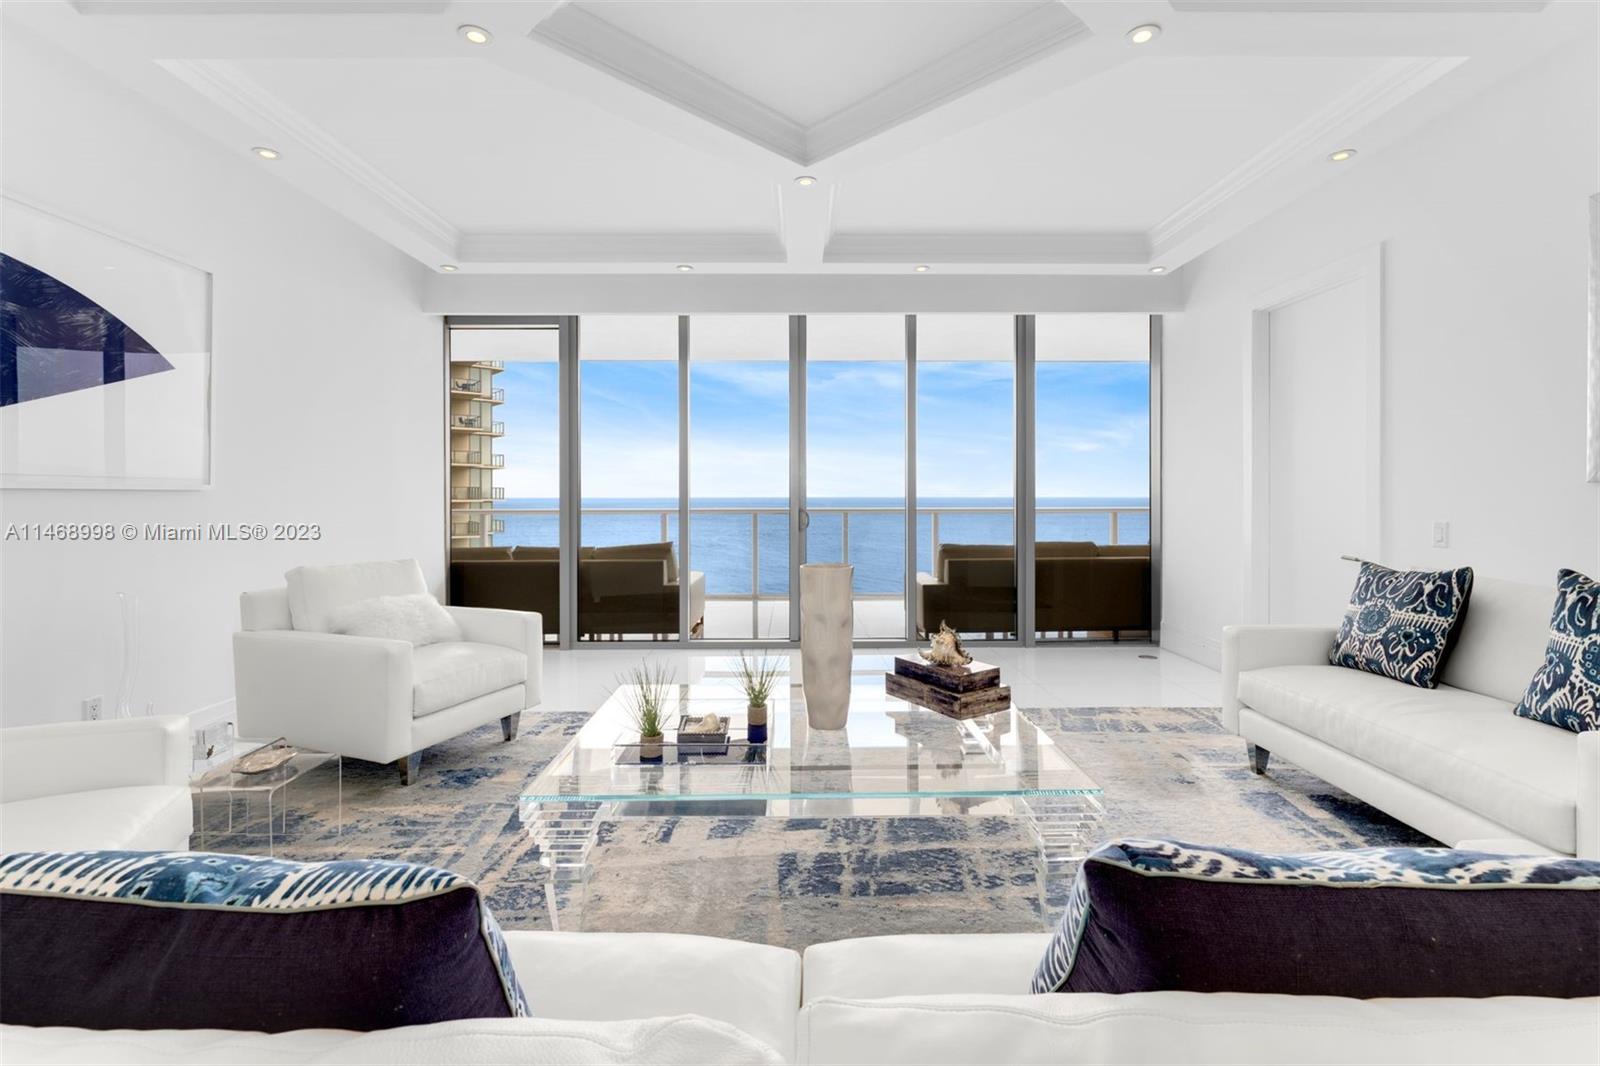 Priced to sell! Incredible opportunity at the iconic St. Regis Bal Harbour. Gorgeous ocean front residence featuring flow-through floor plan with east and west terraces, 3 spacious bedrooms and  3 & 1/2 bathrooms, stunning direct ocean views plus breathtaking sunset views of intracoastal/city skyline. Upgrades and high end finishes throughout with top-of-the-line appliances including open kitchen area, eat-in counter, dual wolf ovens, gas cooktop, Subzero refrigerator/ wine cooler and built-in Miele coffee machine. Enjoy exclusive 5 Stars 5 Diamonds resort amenities such as State of the art fitness center, Spa, Concierge & Butler team, Pool & Beach service , 24 hours in-room dining and much more. Best deal at St. Regis! Across from renowned Bal Harbour Shops.